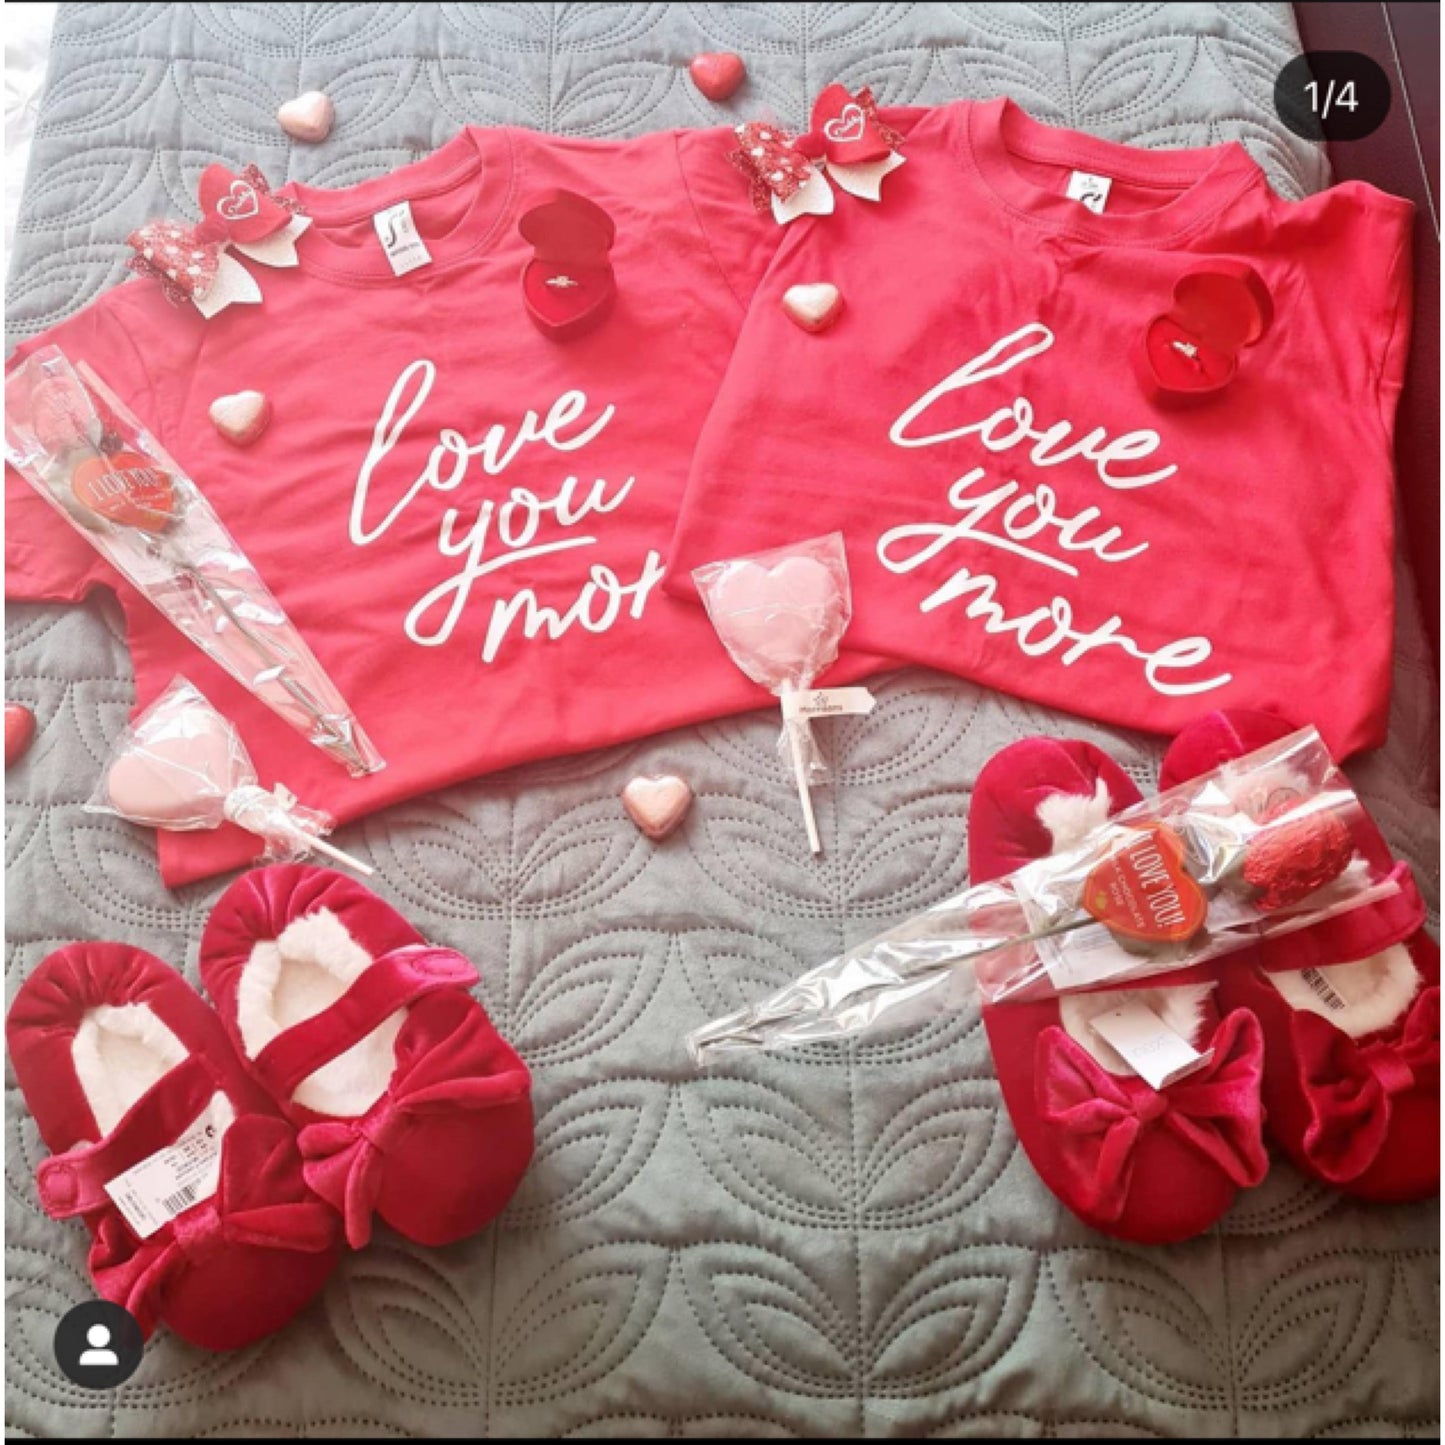 Love You - Love You More Red Twinning T-Shirts